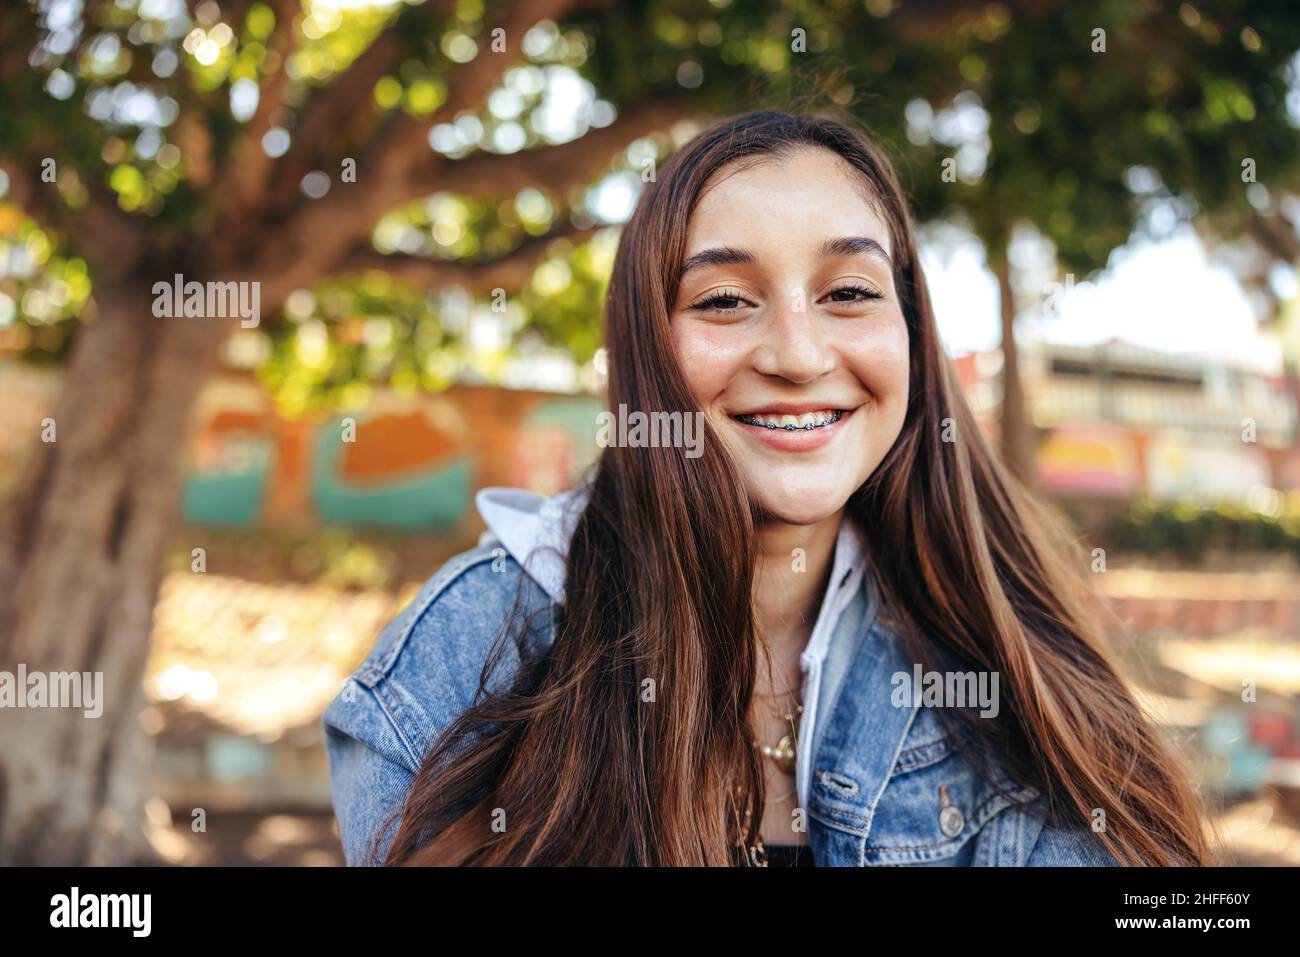 Smiling teenage girl looking at the camera outdoors. Happy young teenager wearing a denim jacket in the city. Female youngster sitting alone in an urb Stock Photo